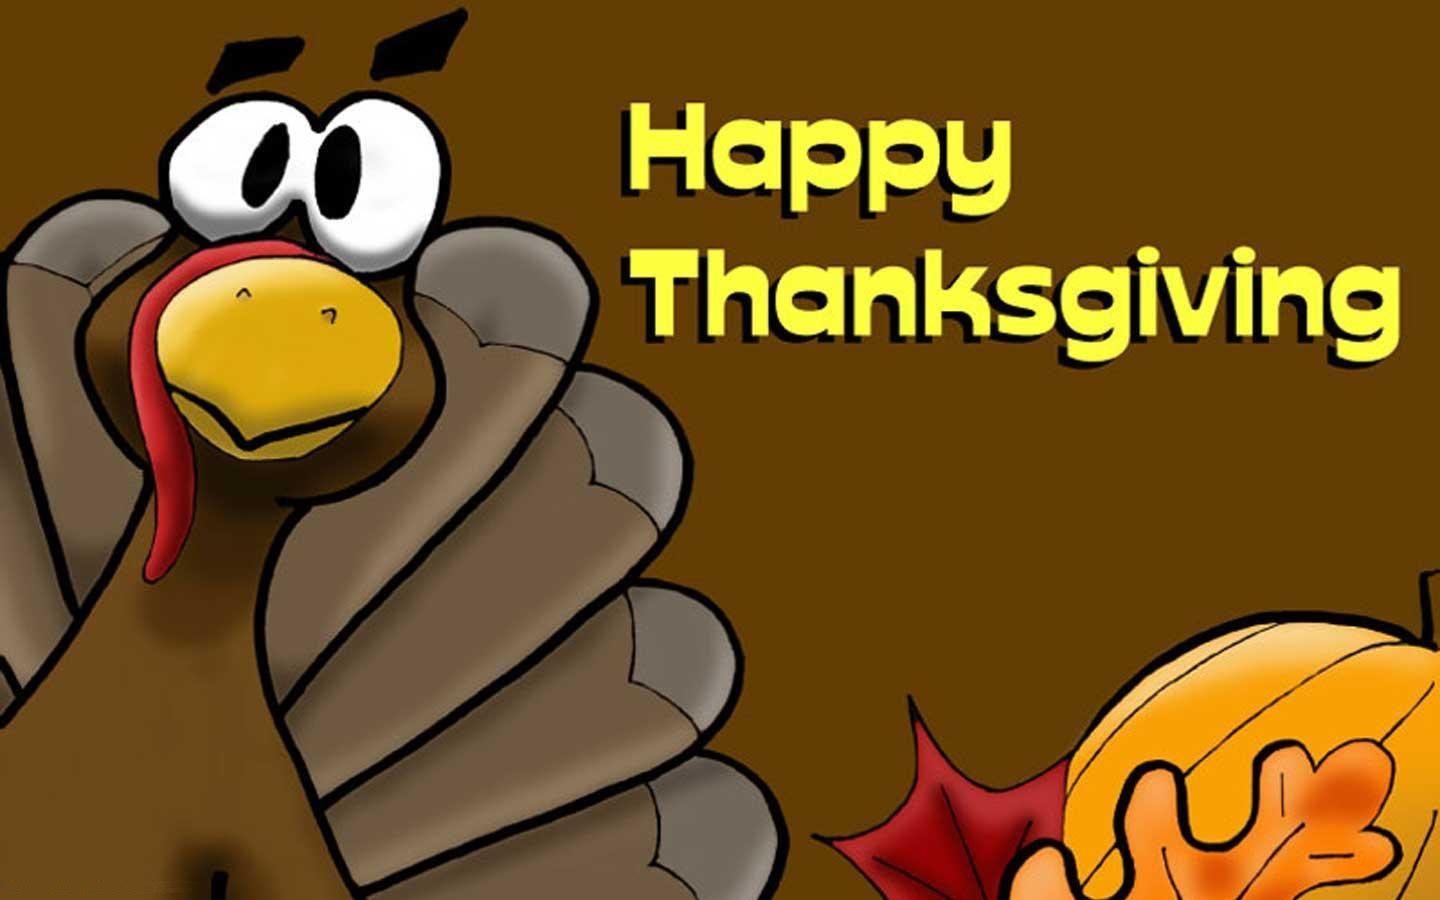 2016{*} Happy Thanksgiving Image, Picture, Clip Arts, Wallpaper